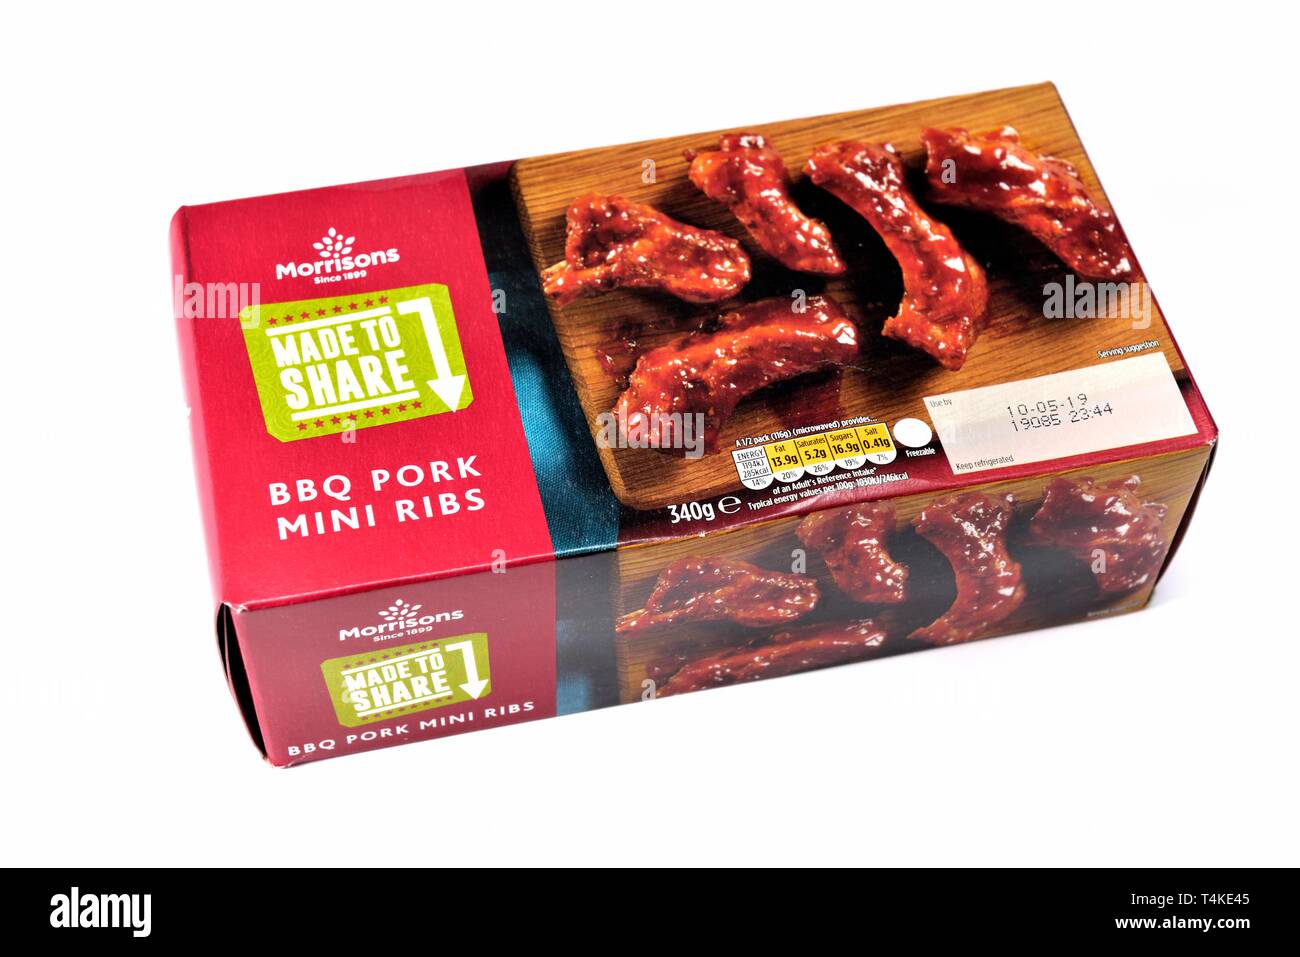 Morrisons, own label, BBQ pork mini ribs,retail pack,retail packaging Stock Photo